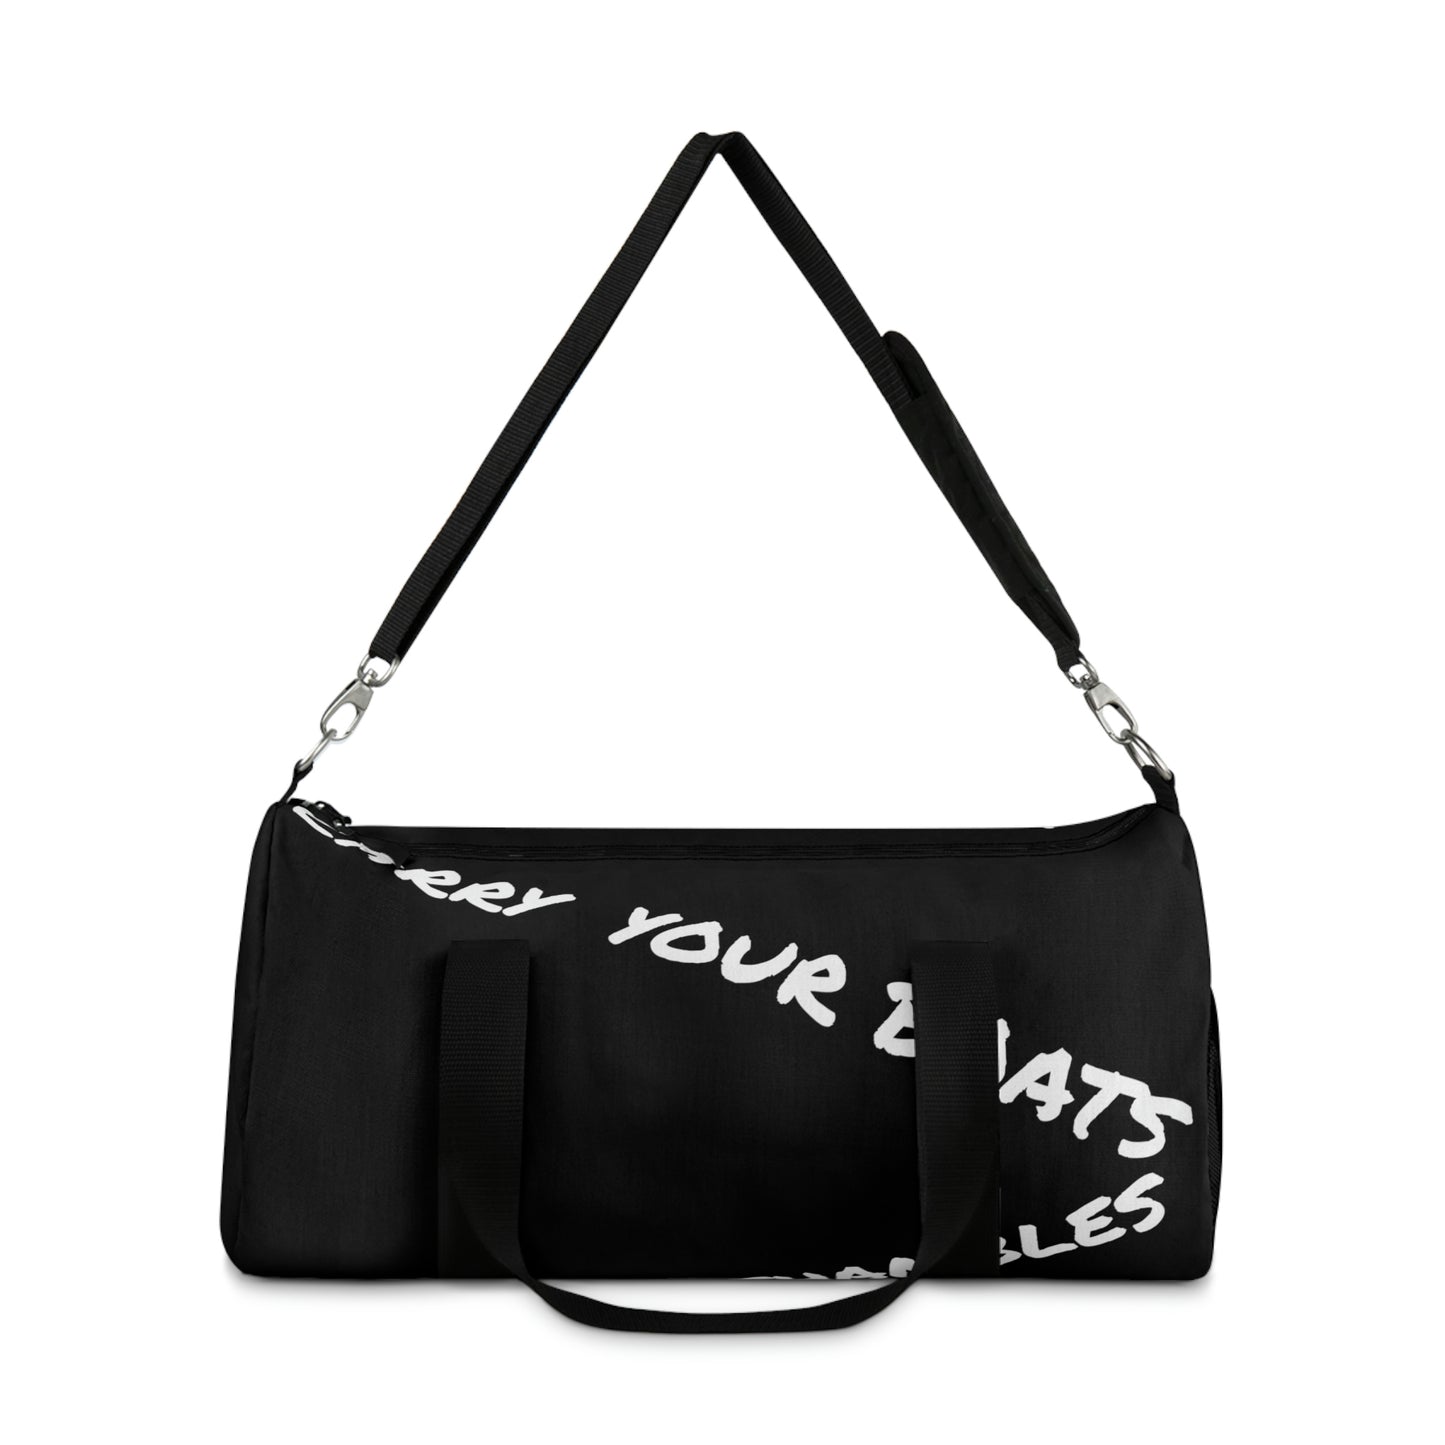 "Carry Your Boats" IDology Duffel Bag